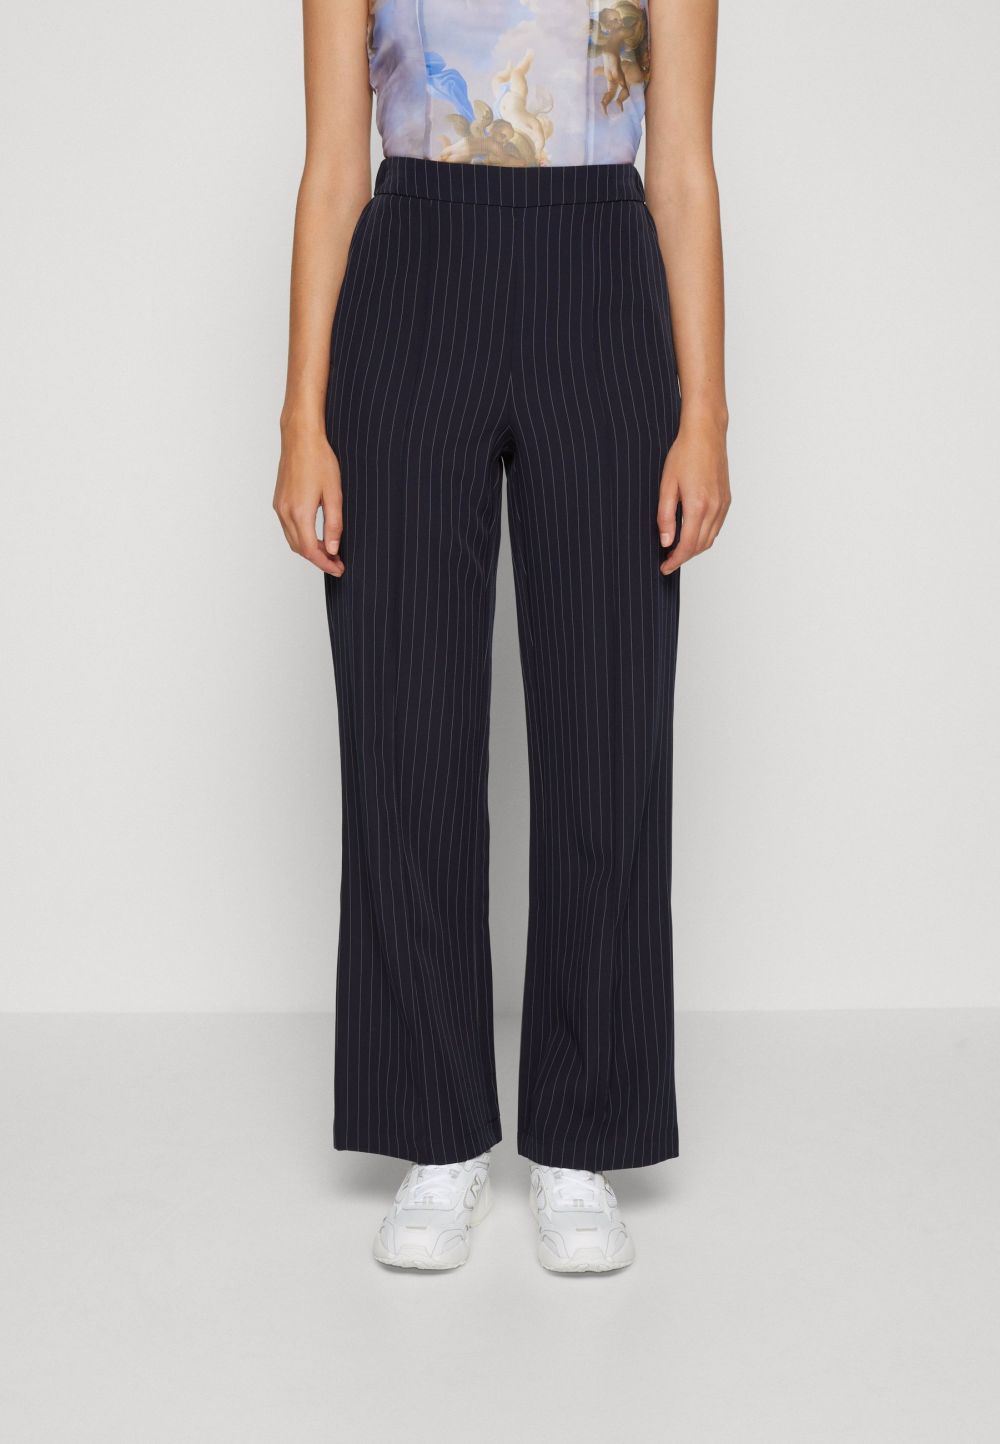 Pantalon BOSSY WIDE stripped marine - pieces - tailleur loose